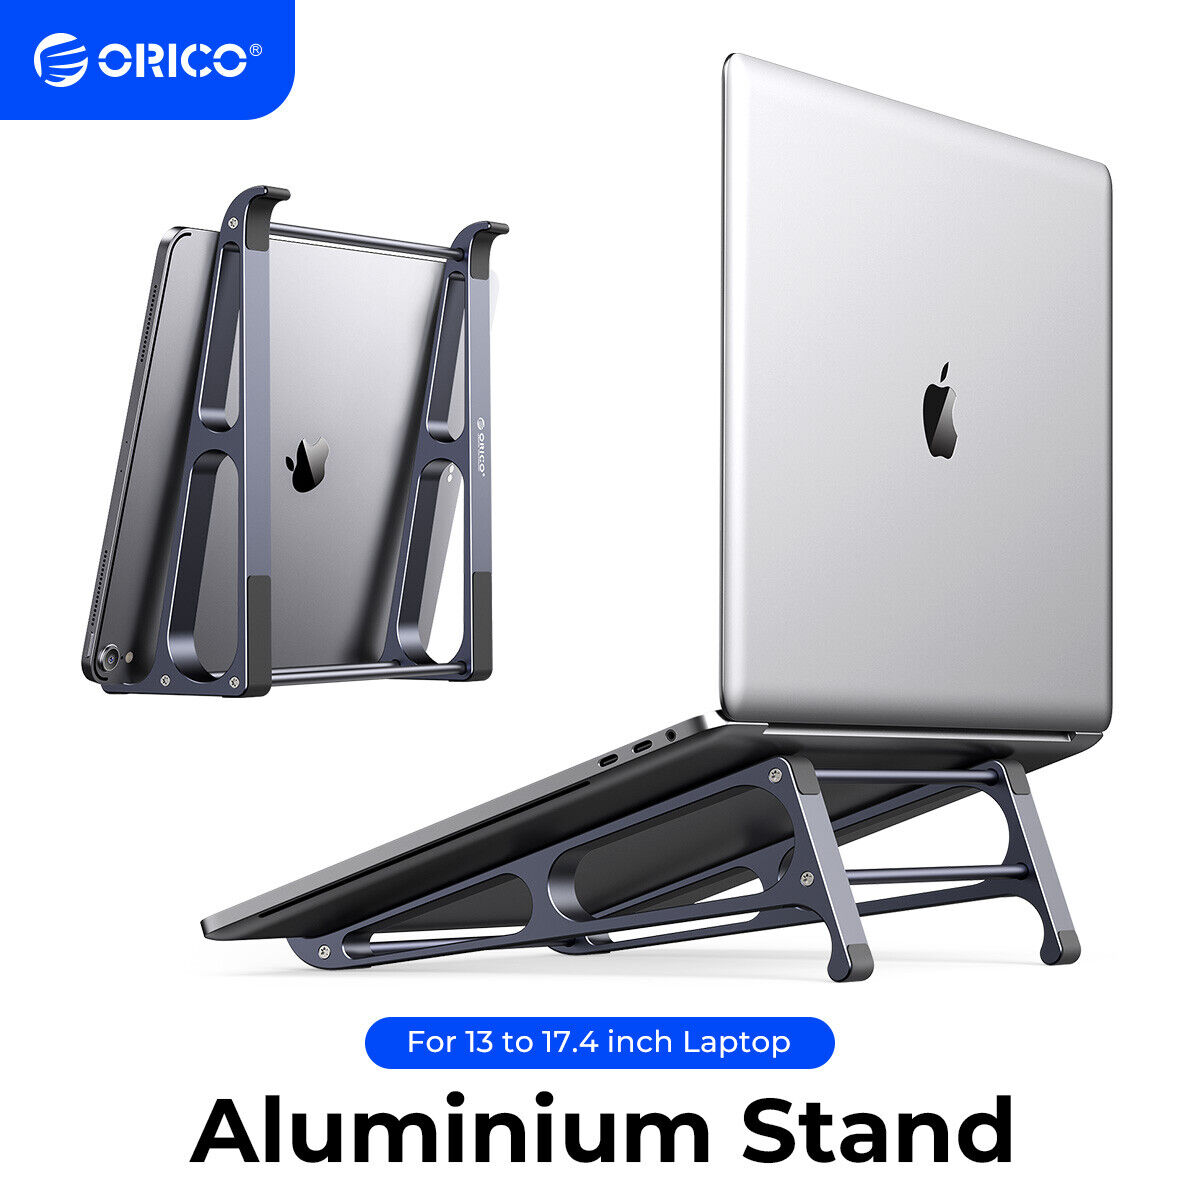 ORICO Aluminum Laptop Stand for 13-17